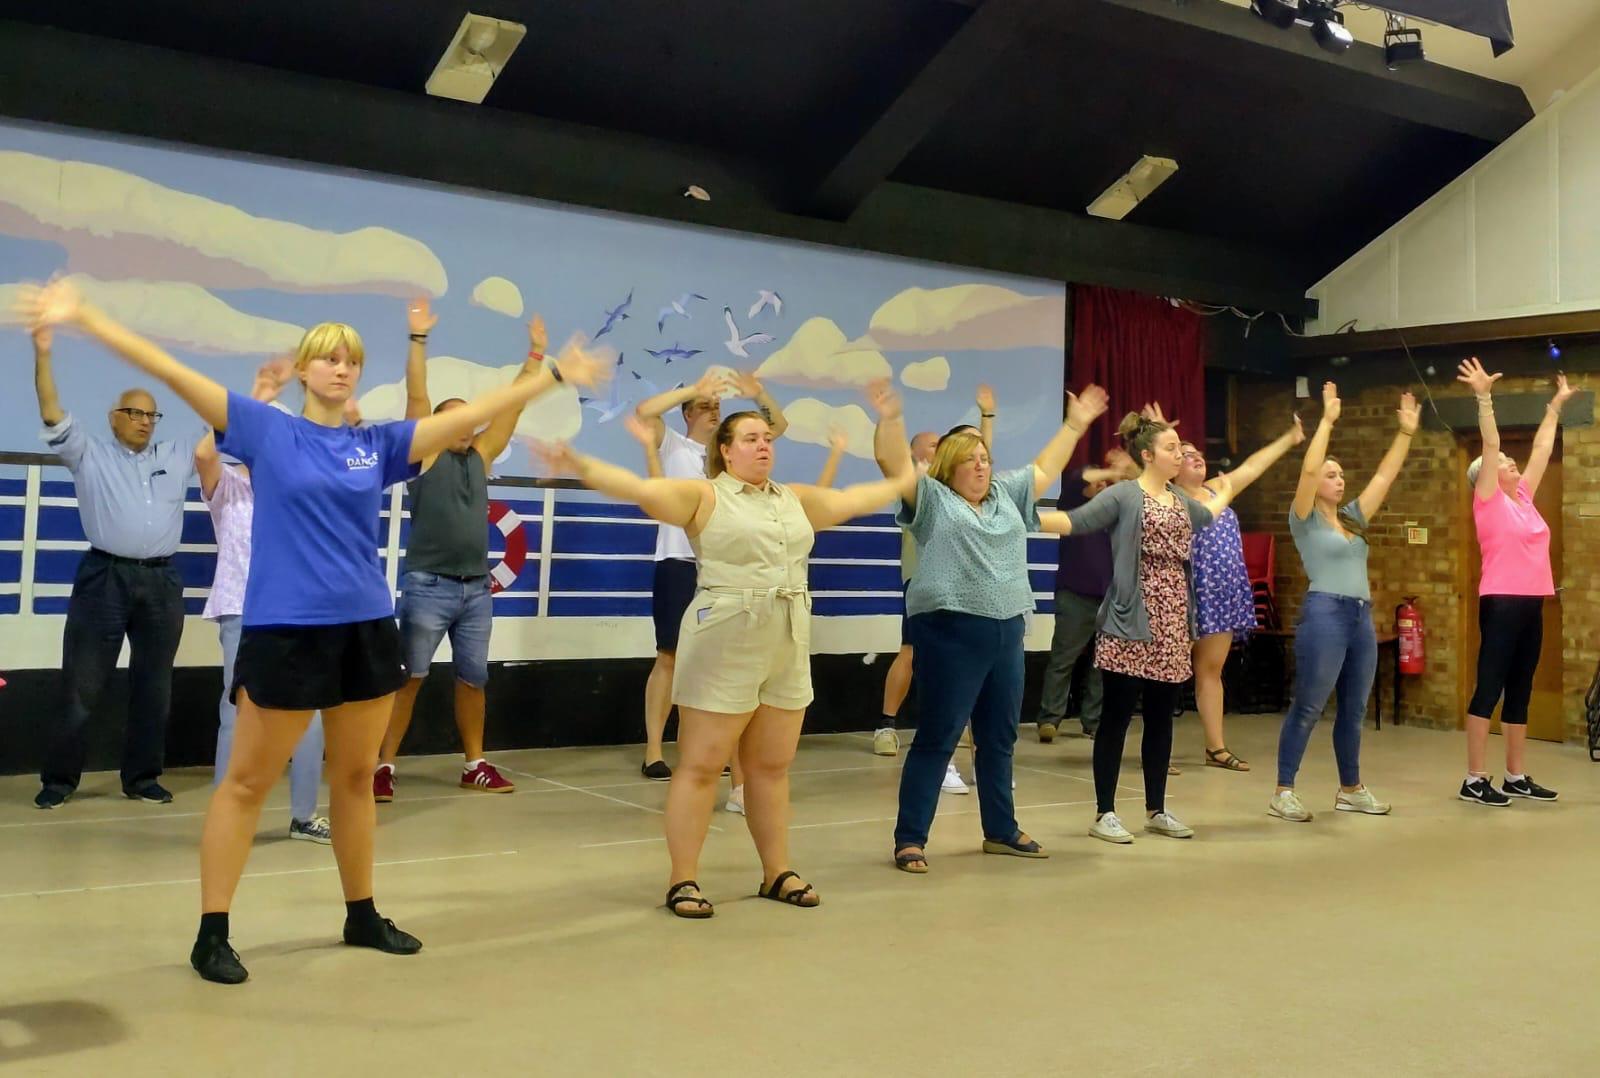 Members of the cast learning the dance to the opening number